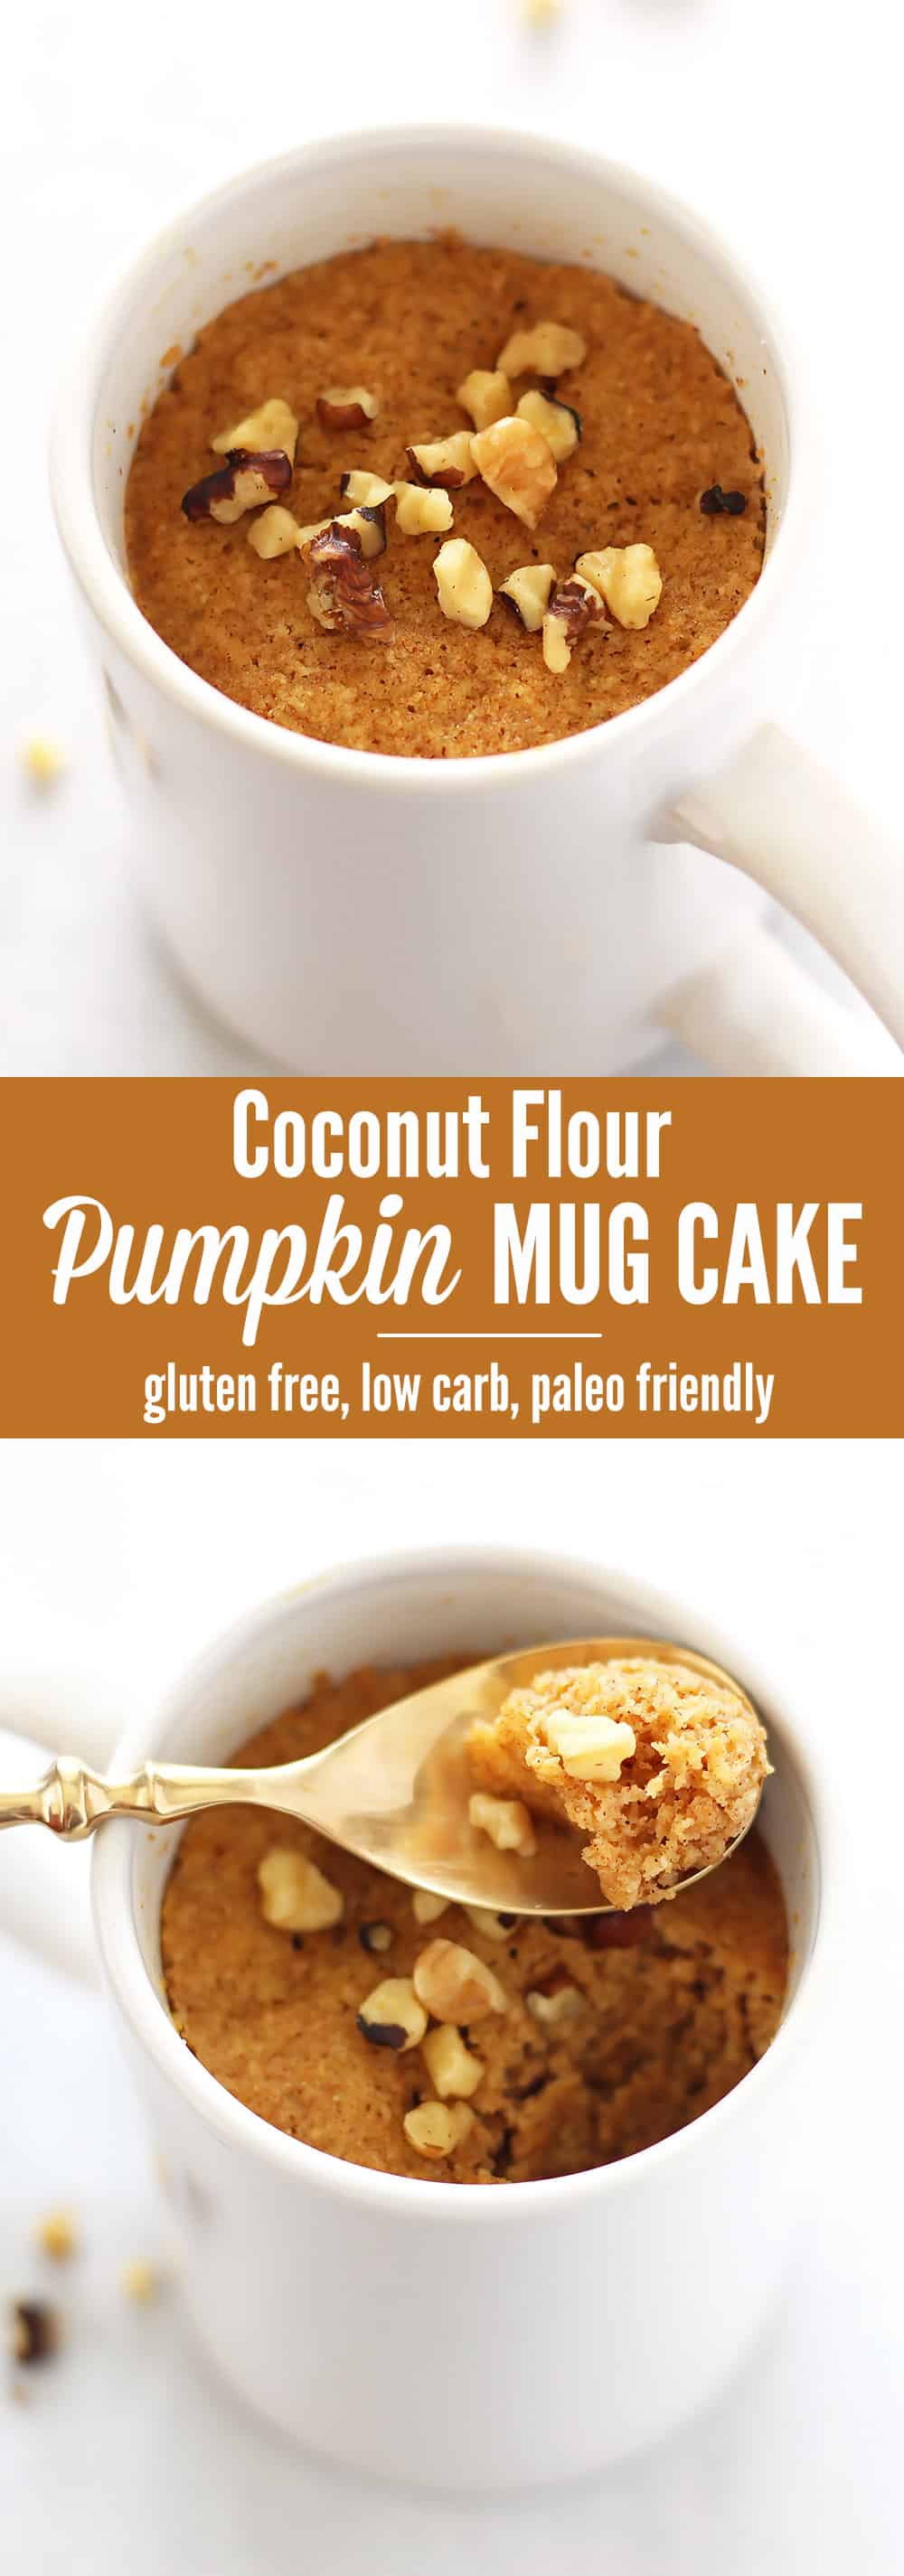 Coconut Flour Pumpkin Spice Mug Cake - this healthy and delicious dessert recipe takes only 5 minutes to make! PERFECT to quickly satisfy sweet cravings with REAL food ingredients. This recipe is gluten free, low carb and paleo friendly.